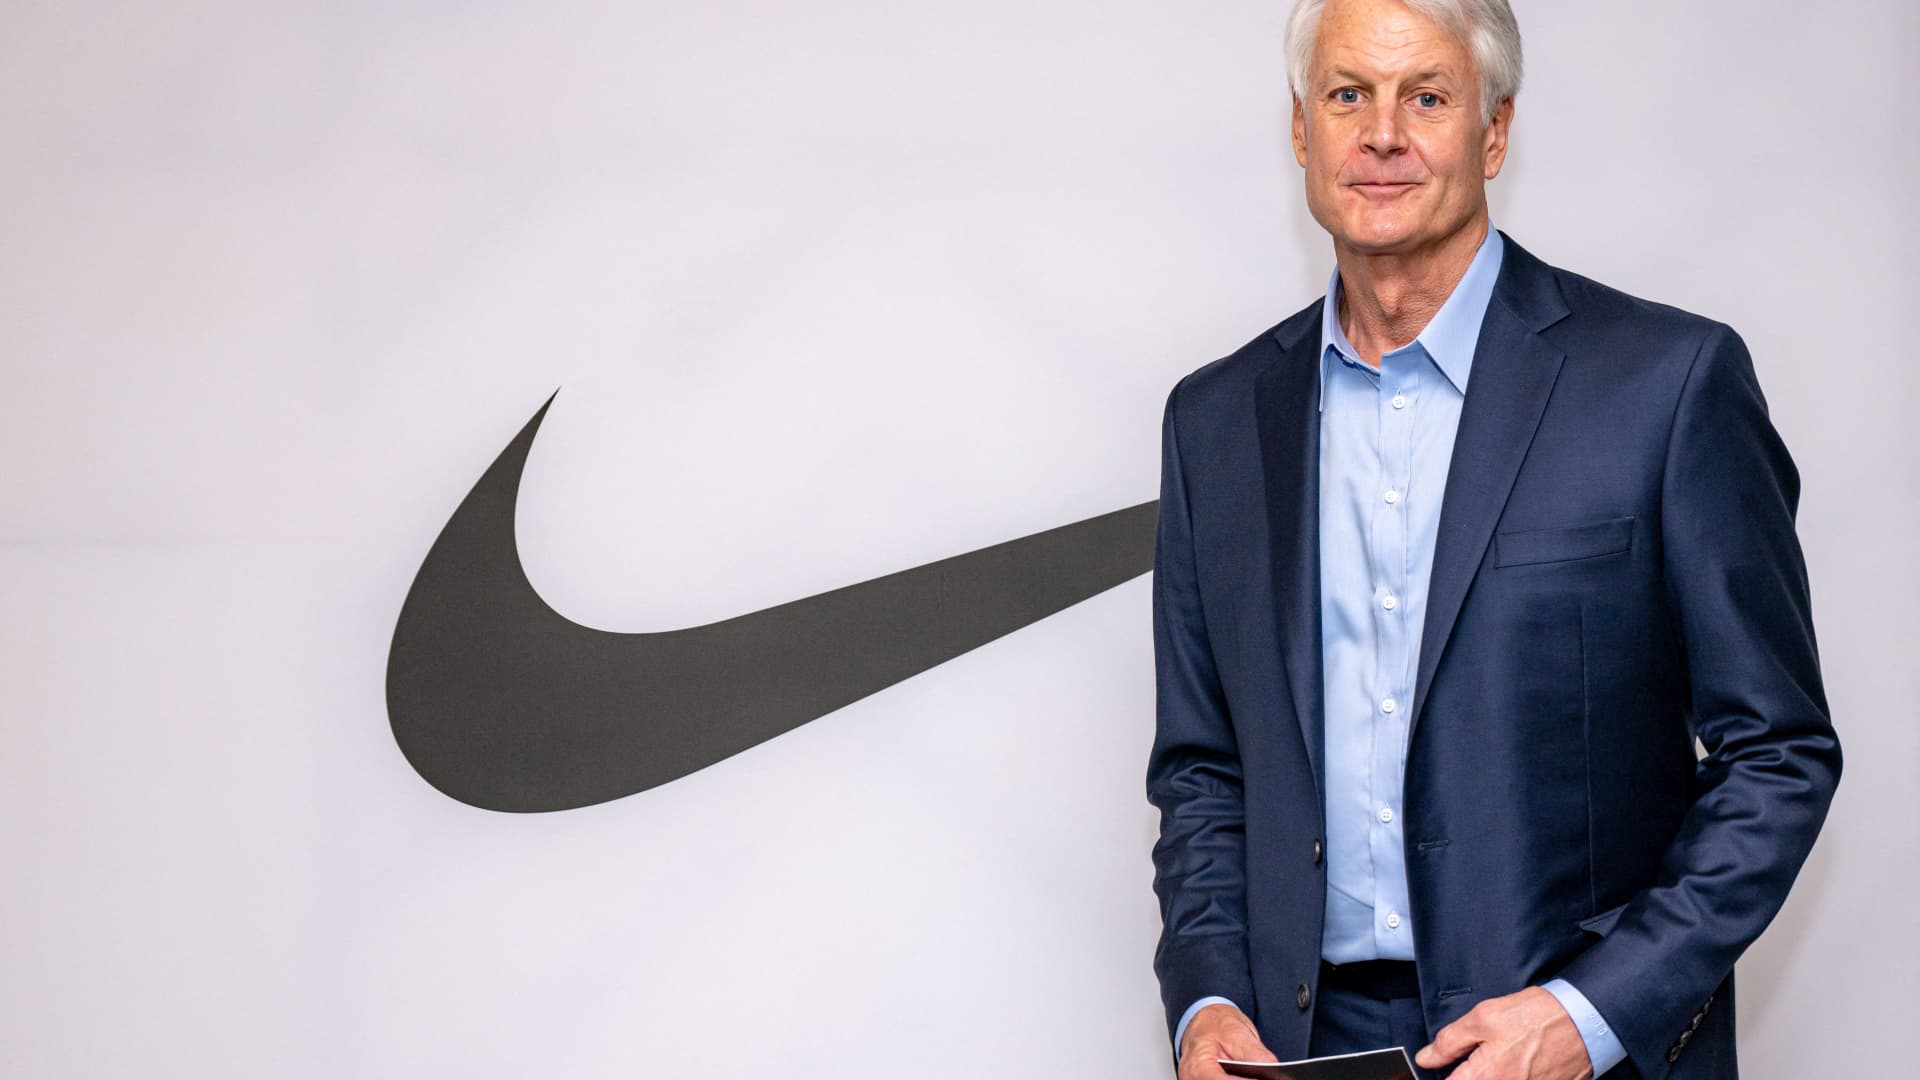 Nike CEO John Donahoe on how he manages sleep health in a hectic life